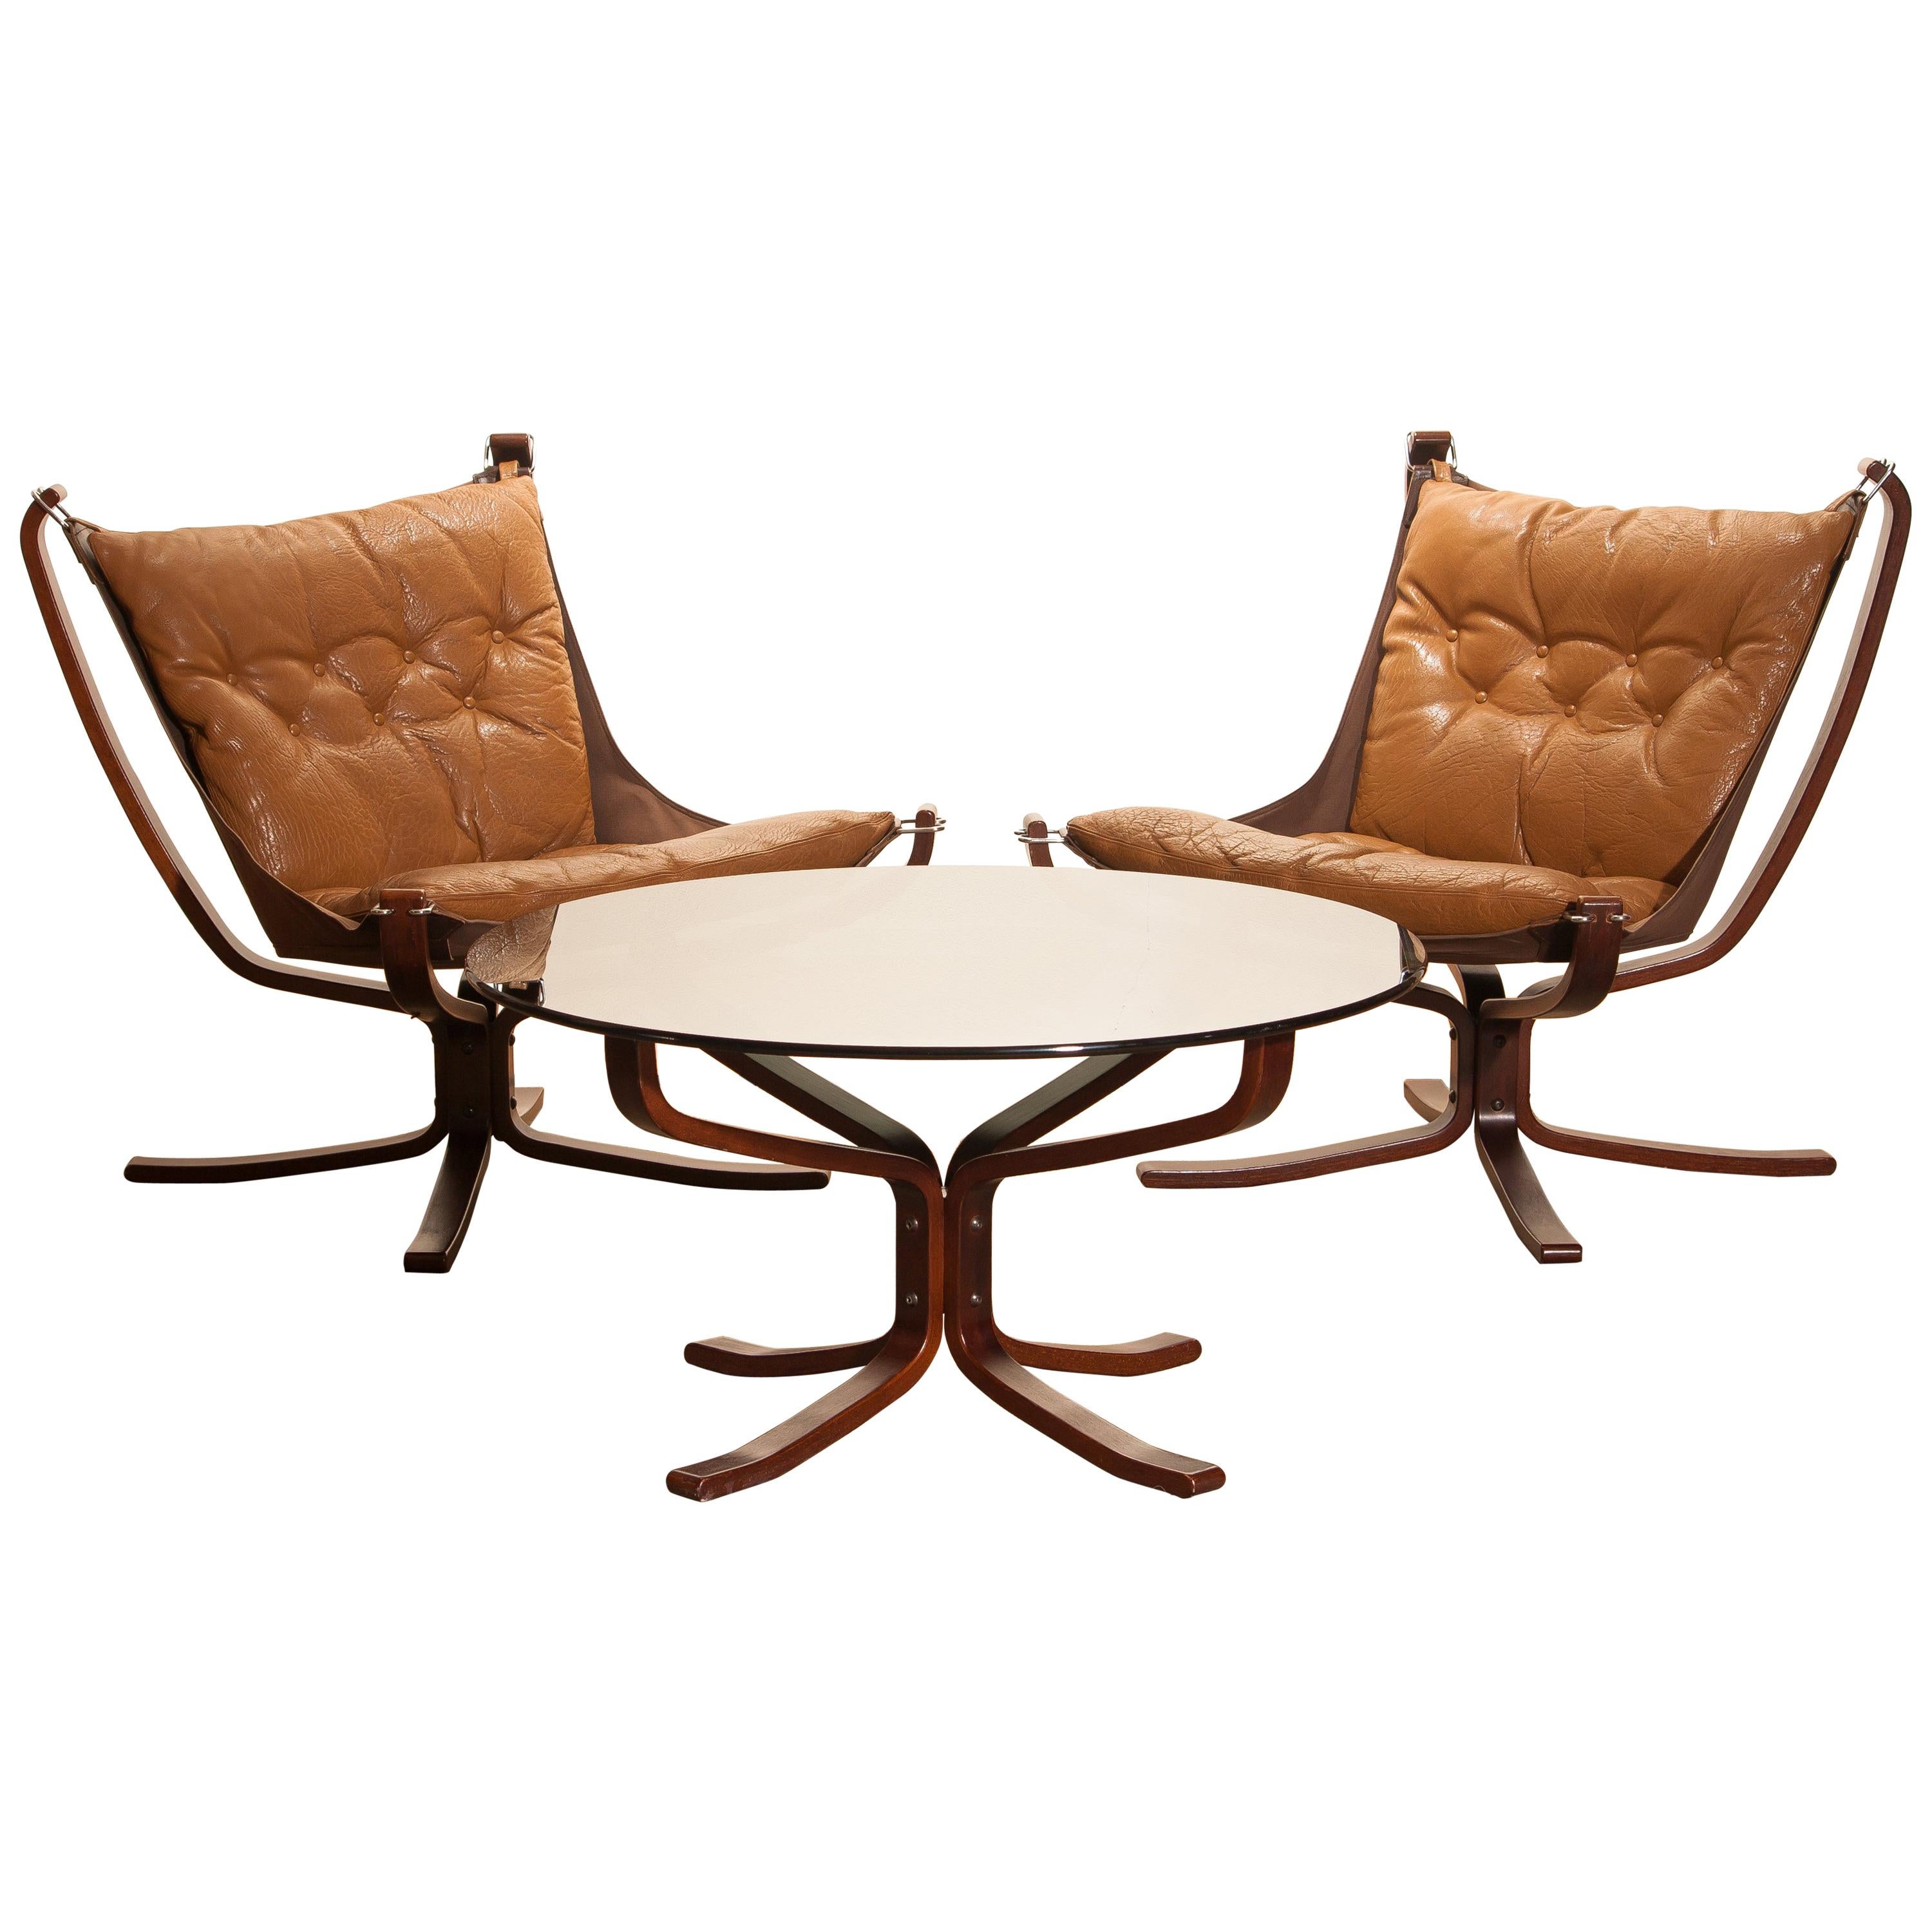 Extremely beautiful set of two 'Falcon' lounge / easy chairs complete with the original coffee table designed by Sigurd Ressell Norway.
The chairs and the table are in very good original condition.
The camel leather seating as the wooden frames